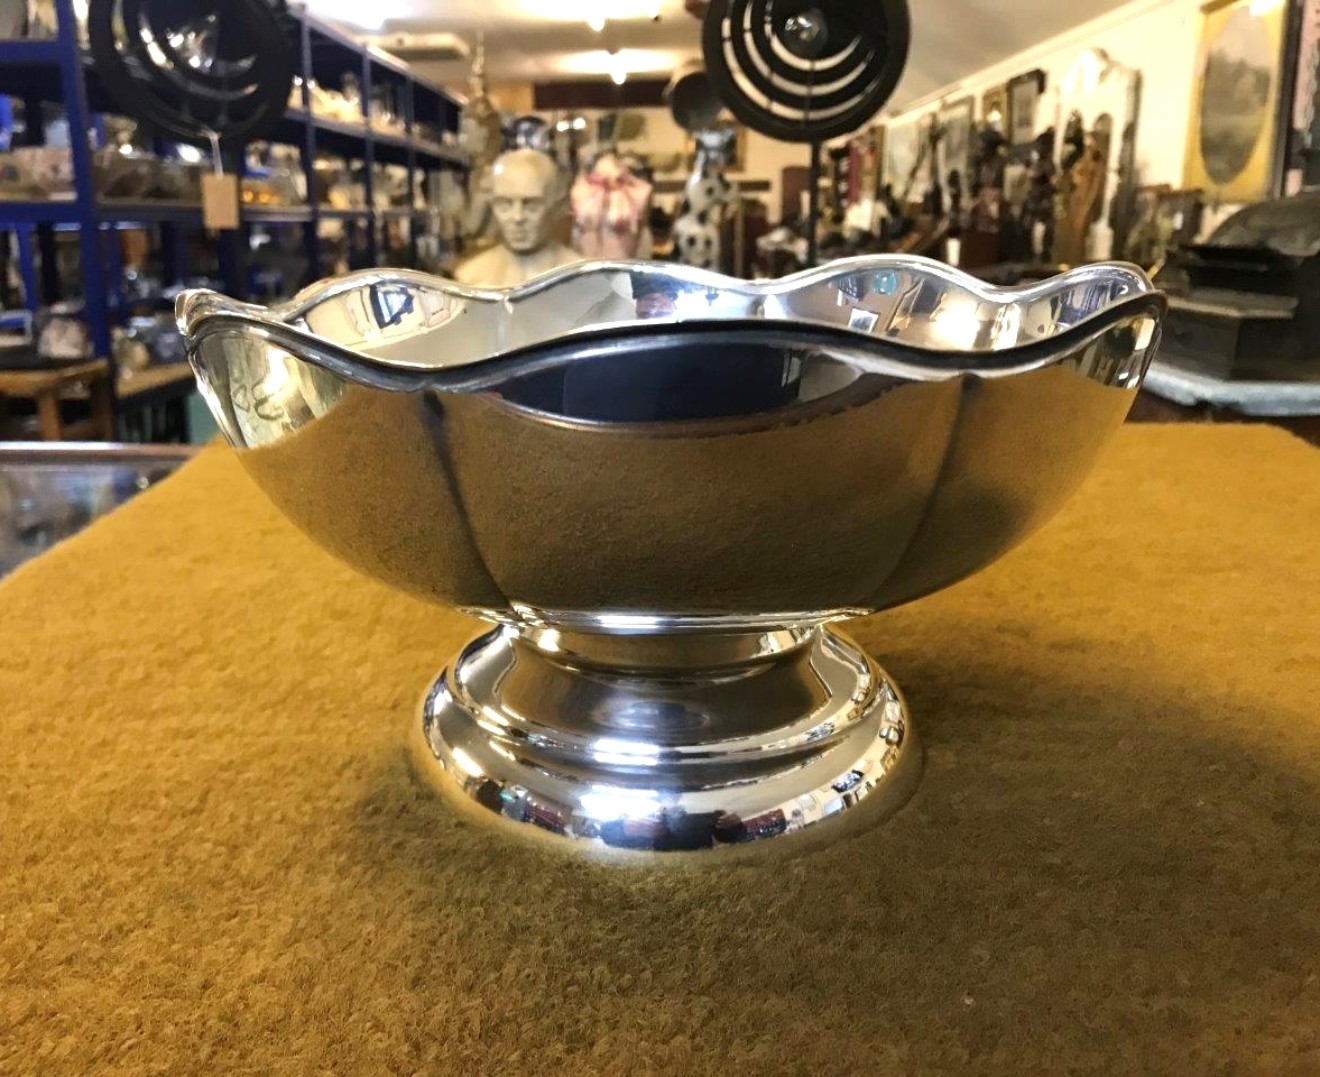 Silver Plated Fruit Bowl Marked CW A1 SPC